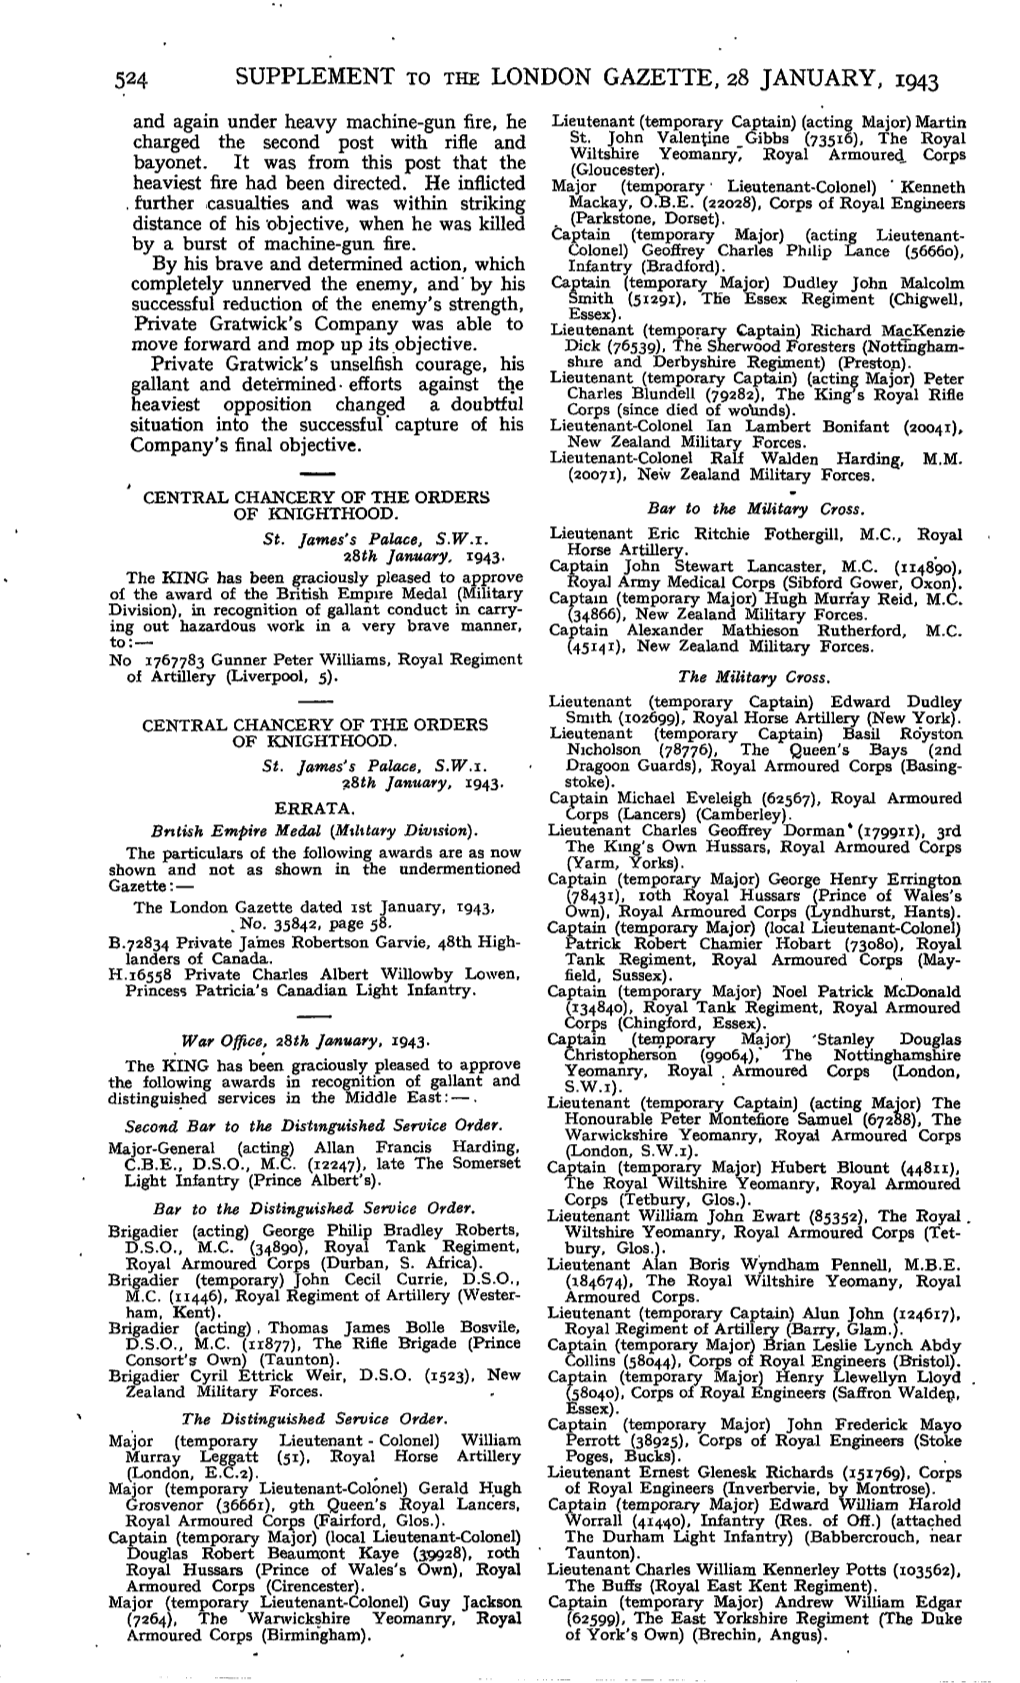 524 Supplement to the London Gazette, 28 January, 1943